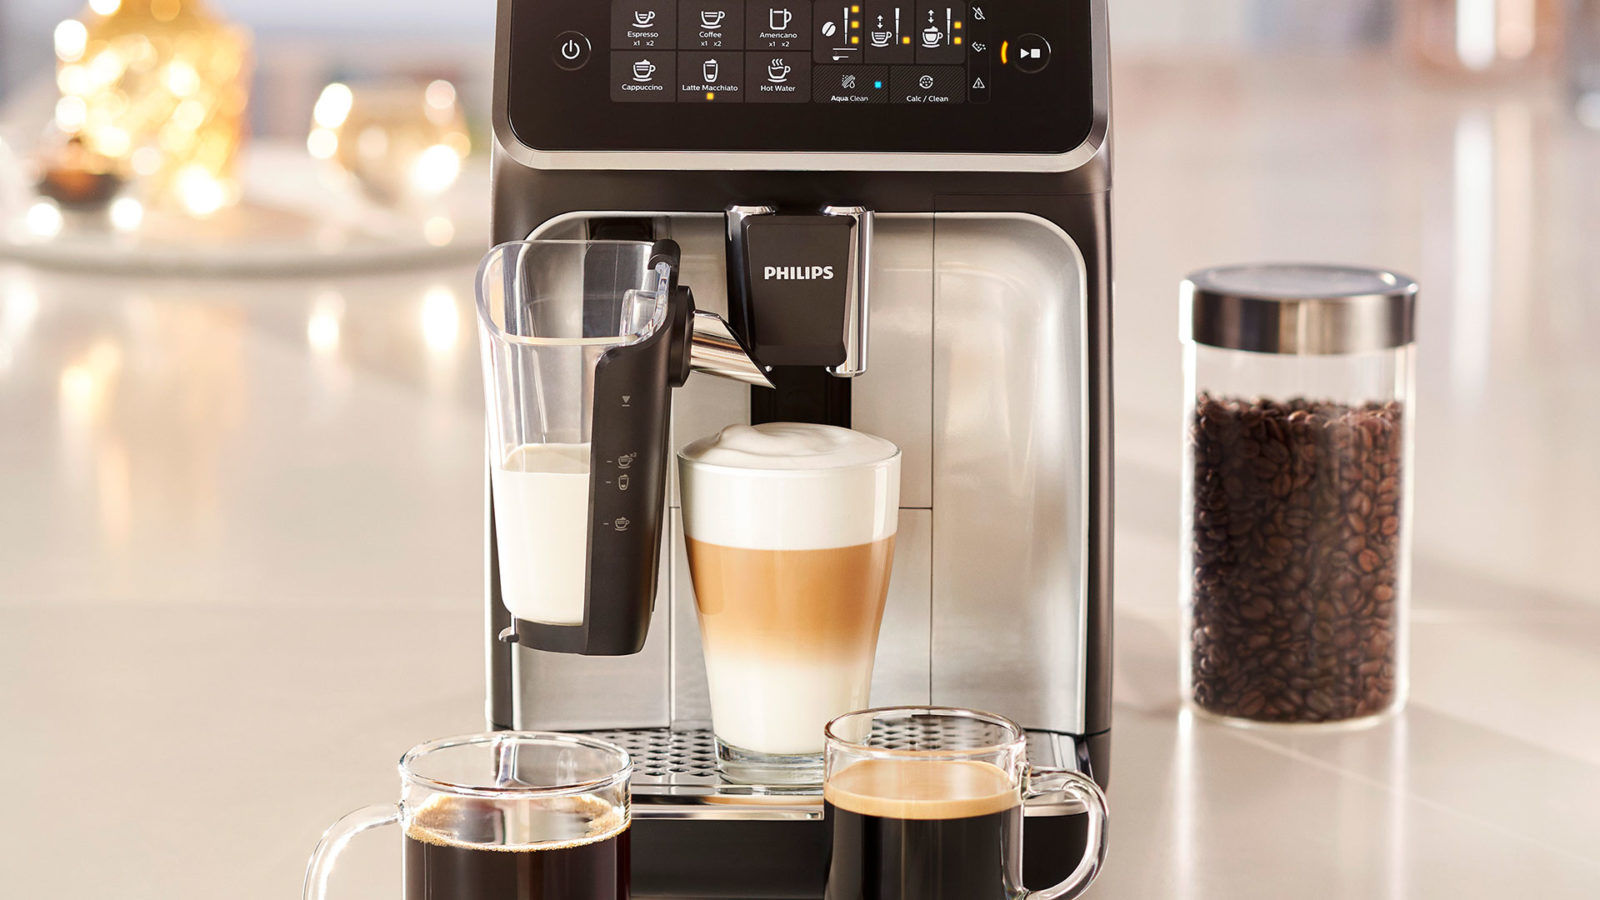 Review: The Philips 3200 LatteGo is a work of wonder when we're